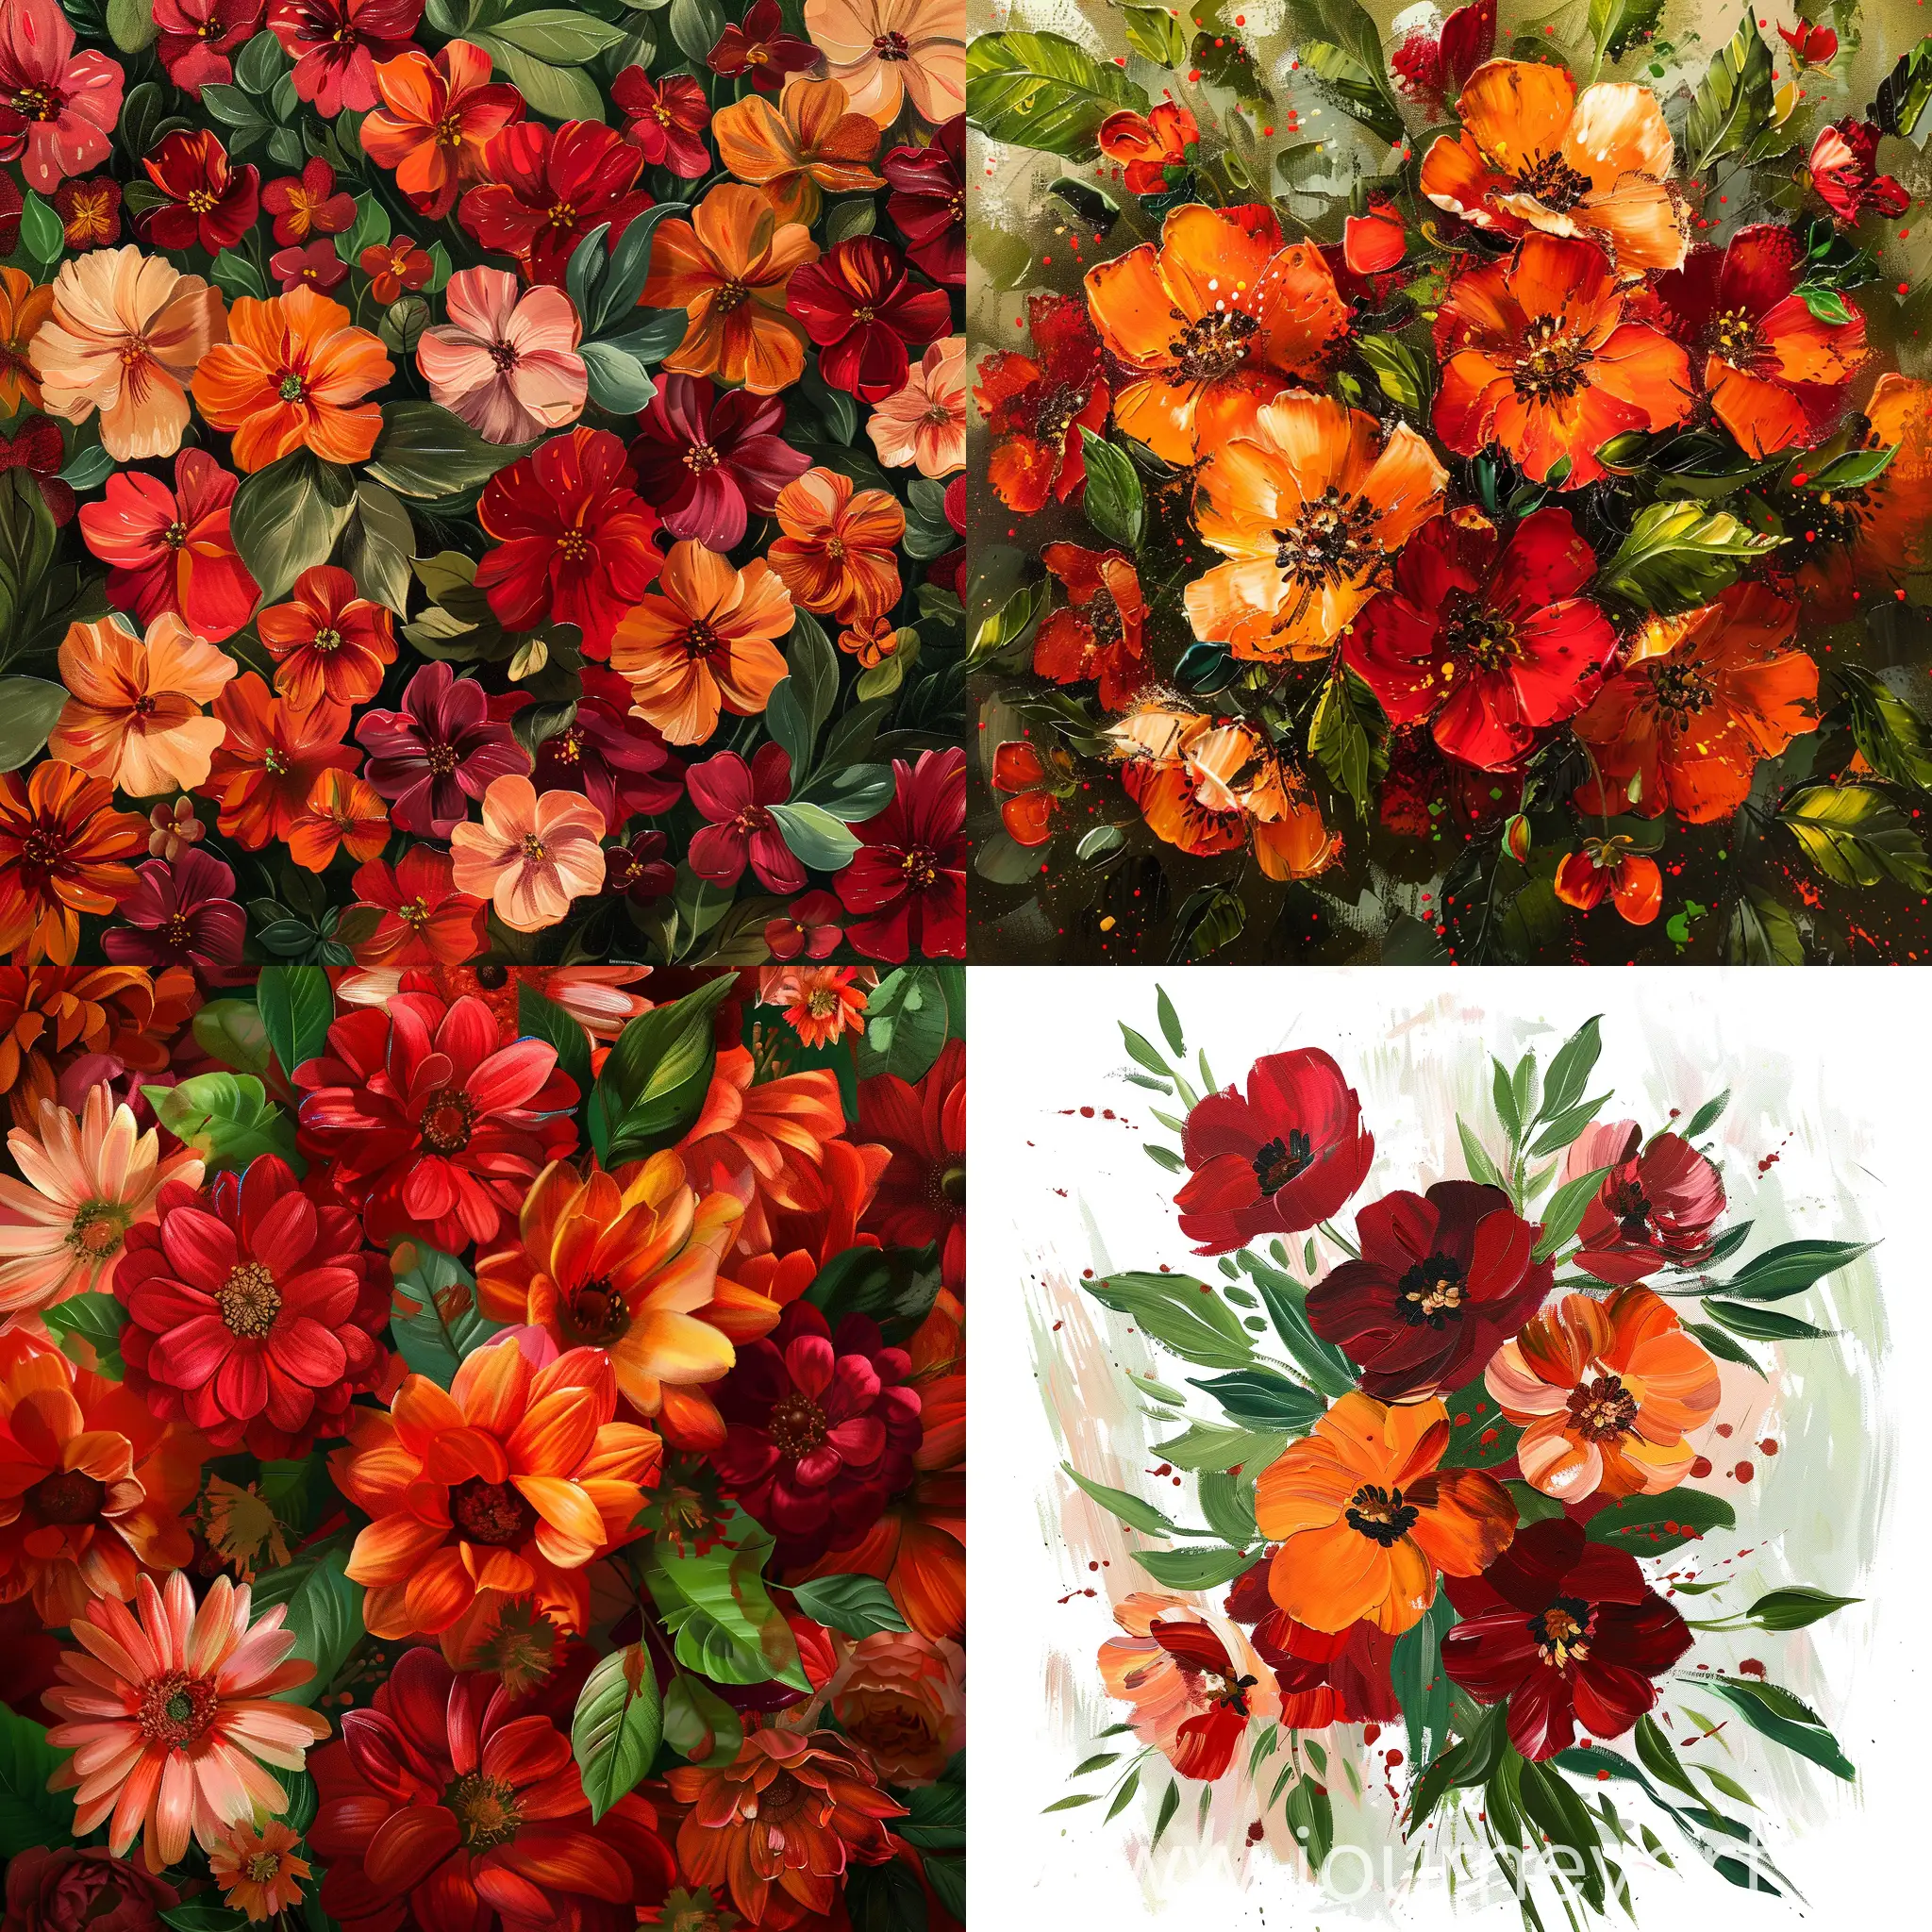 A bouquet of flowers, 
Illustration, 
Red and orange flowers intersperse, 
Green leaf embellishments, 
Oil painting texture